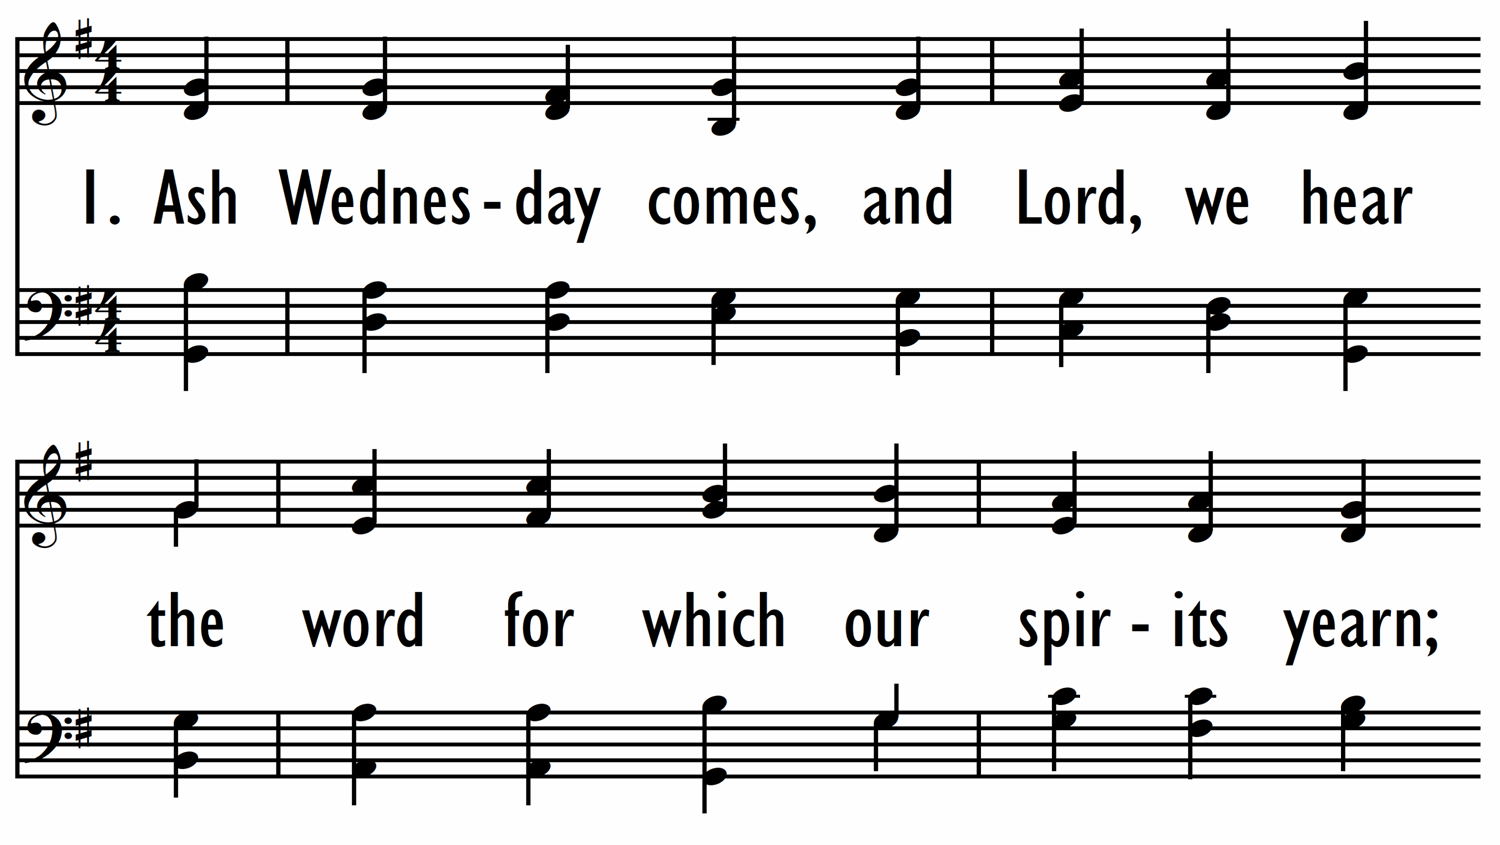 ASH WEDNESDAY COMES AND, LORD, WE HEAR Digital Songs & Hymns